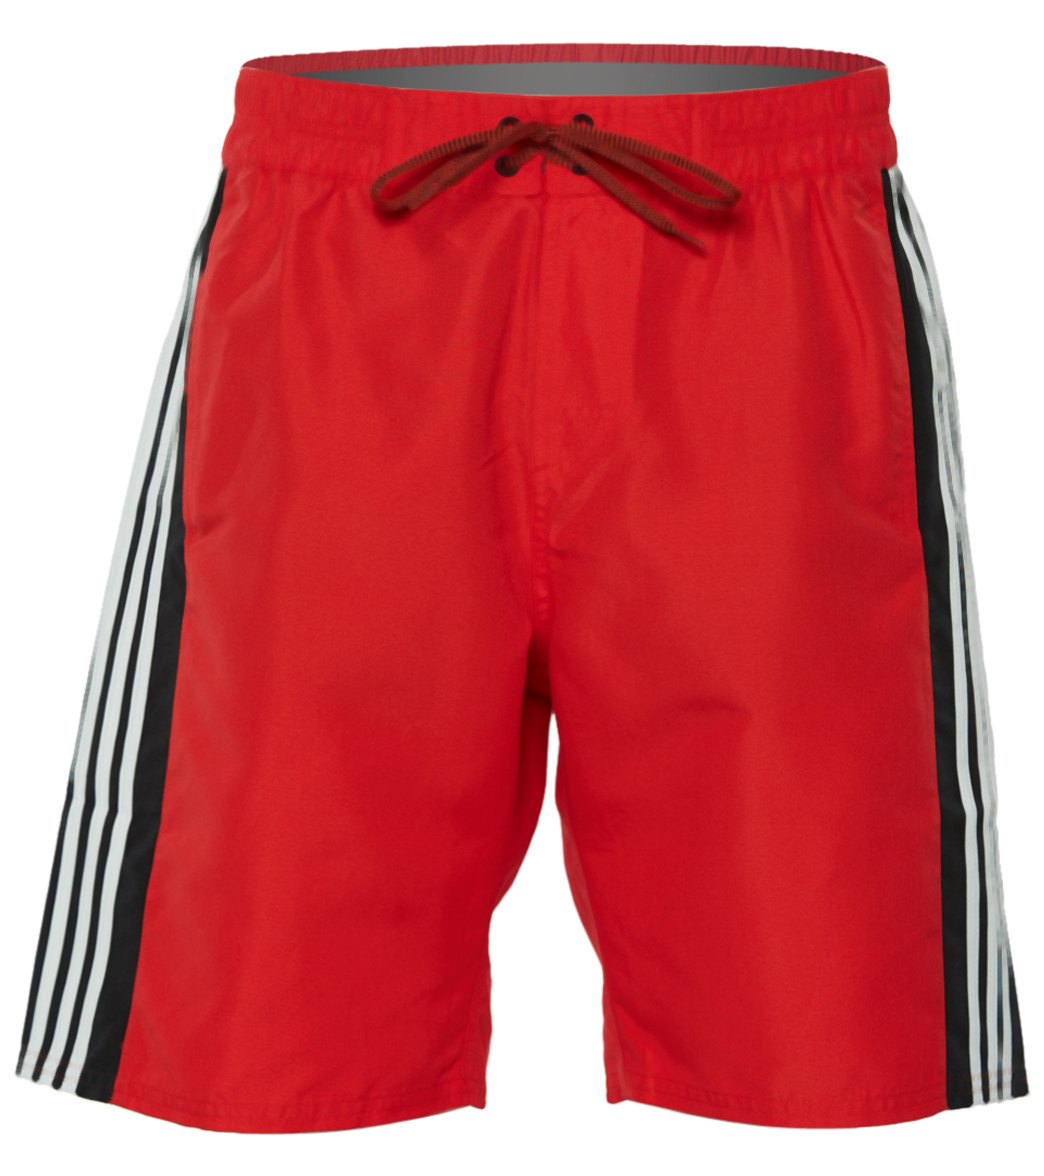 Adidas Hoopshot 20 Volley Shorts - Red Xxl - Swimoutlet.com